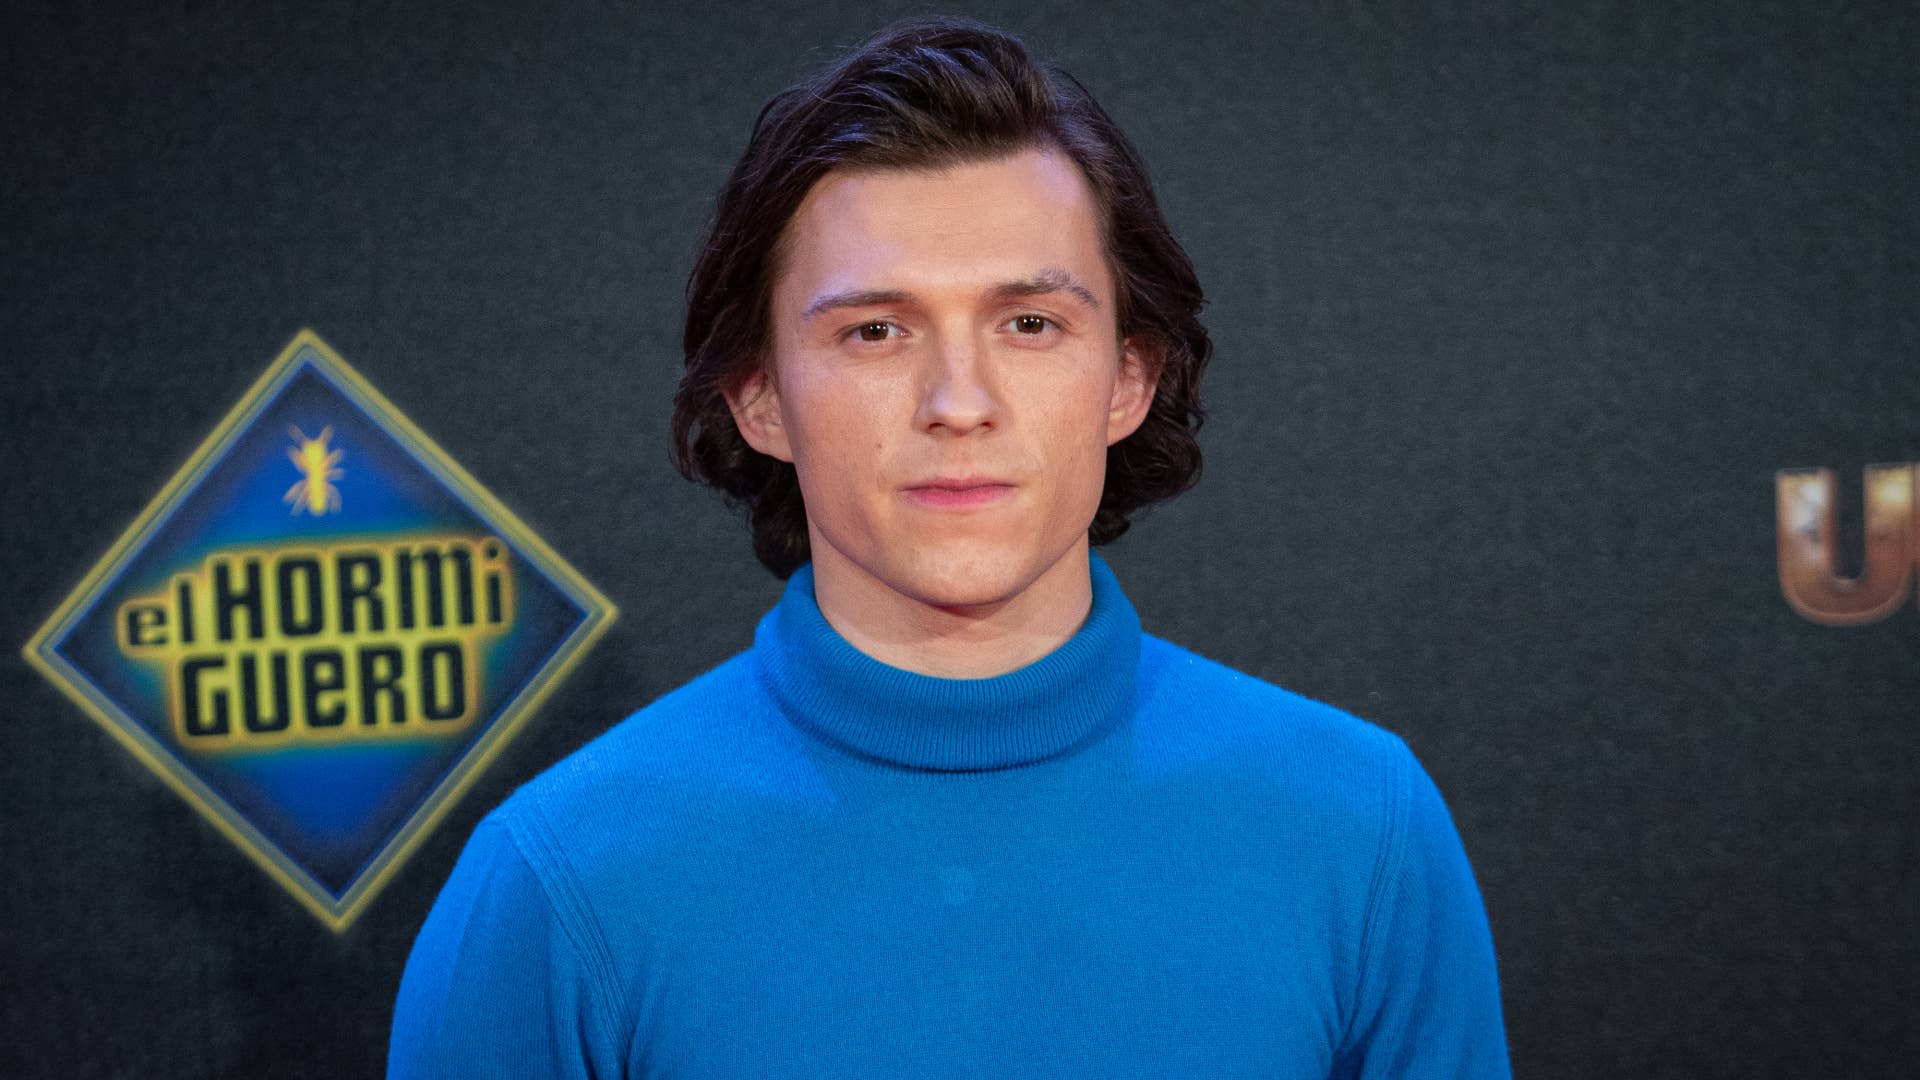 Tom Holland is pictured at a red carpet event